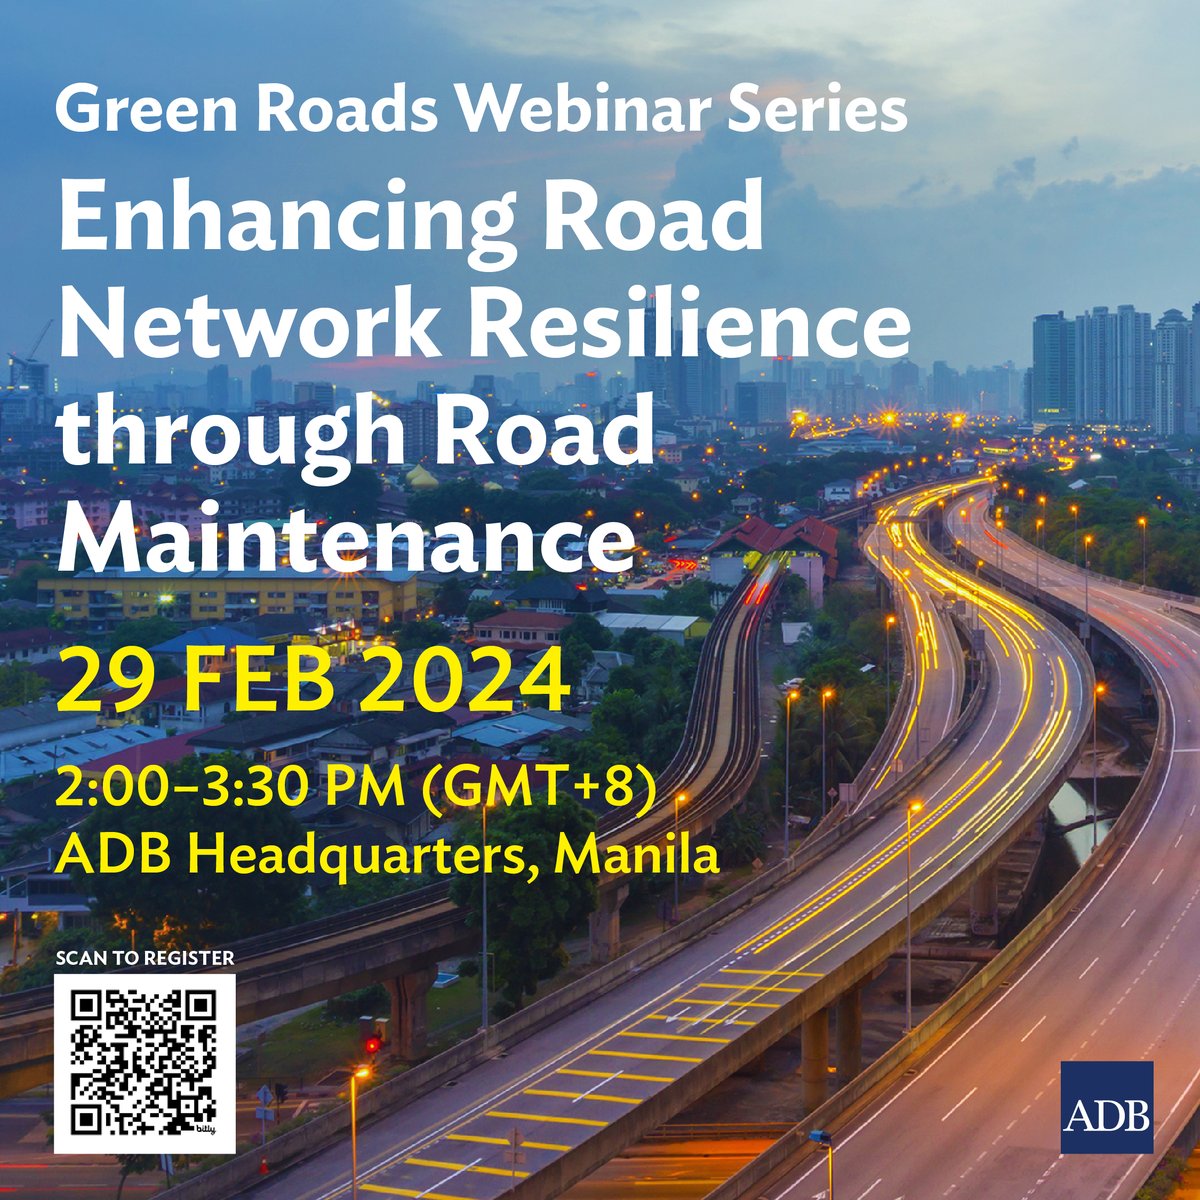 For many developing member states in Asia and the Pacific, road networks’ maintenance activities could deliver a higher return on investment than a focus on new infrastructure. Join us to discuss policies that can enhance the resilience of road networks: ow.ly/qfb050QFYpM